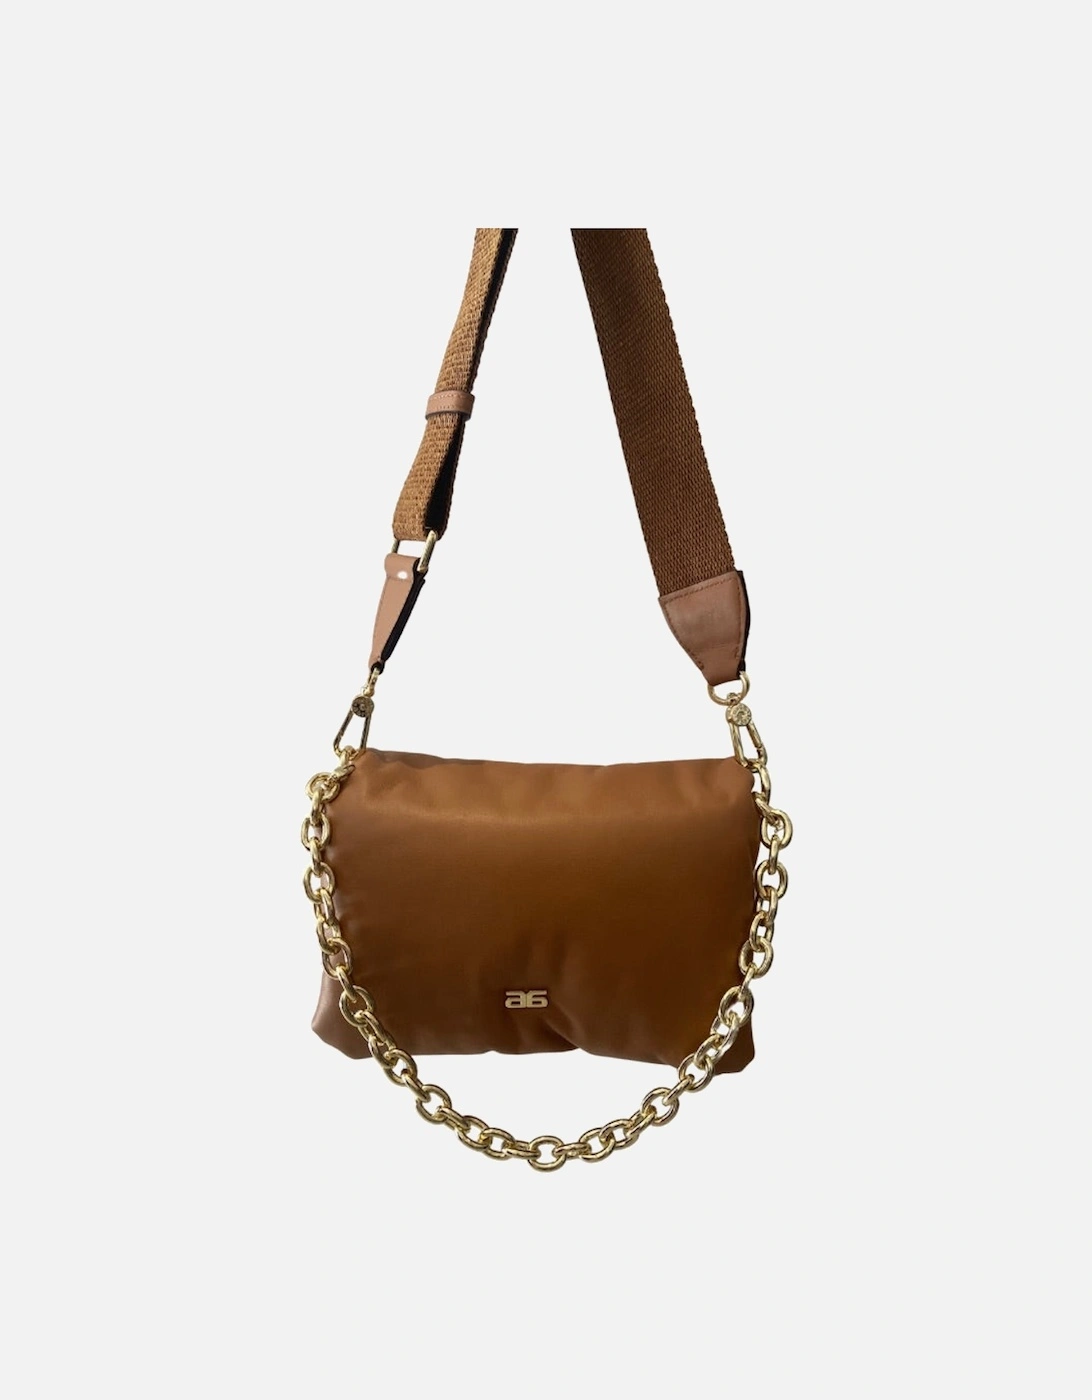 Puffer bag with gold chain strap, 2 of 1